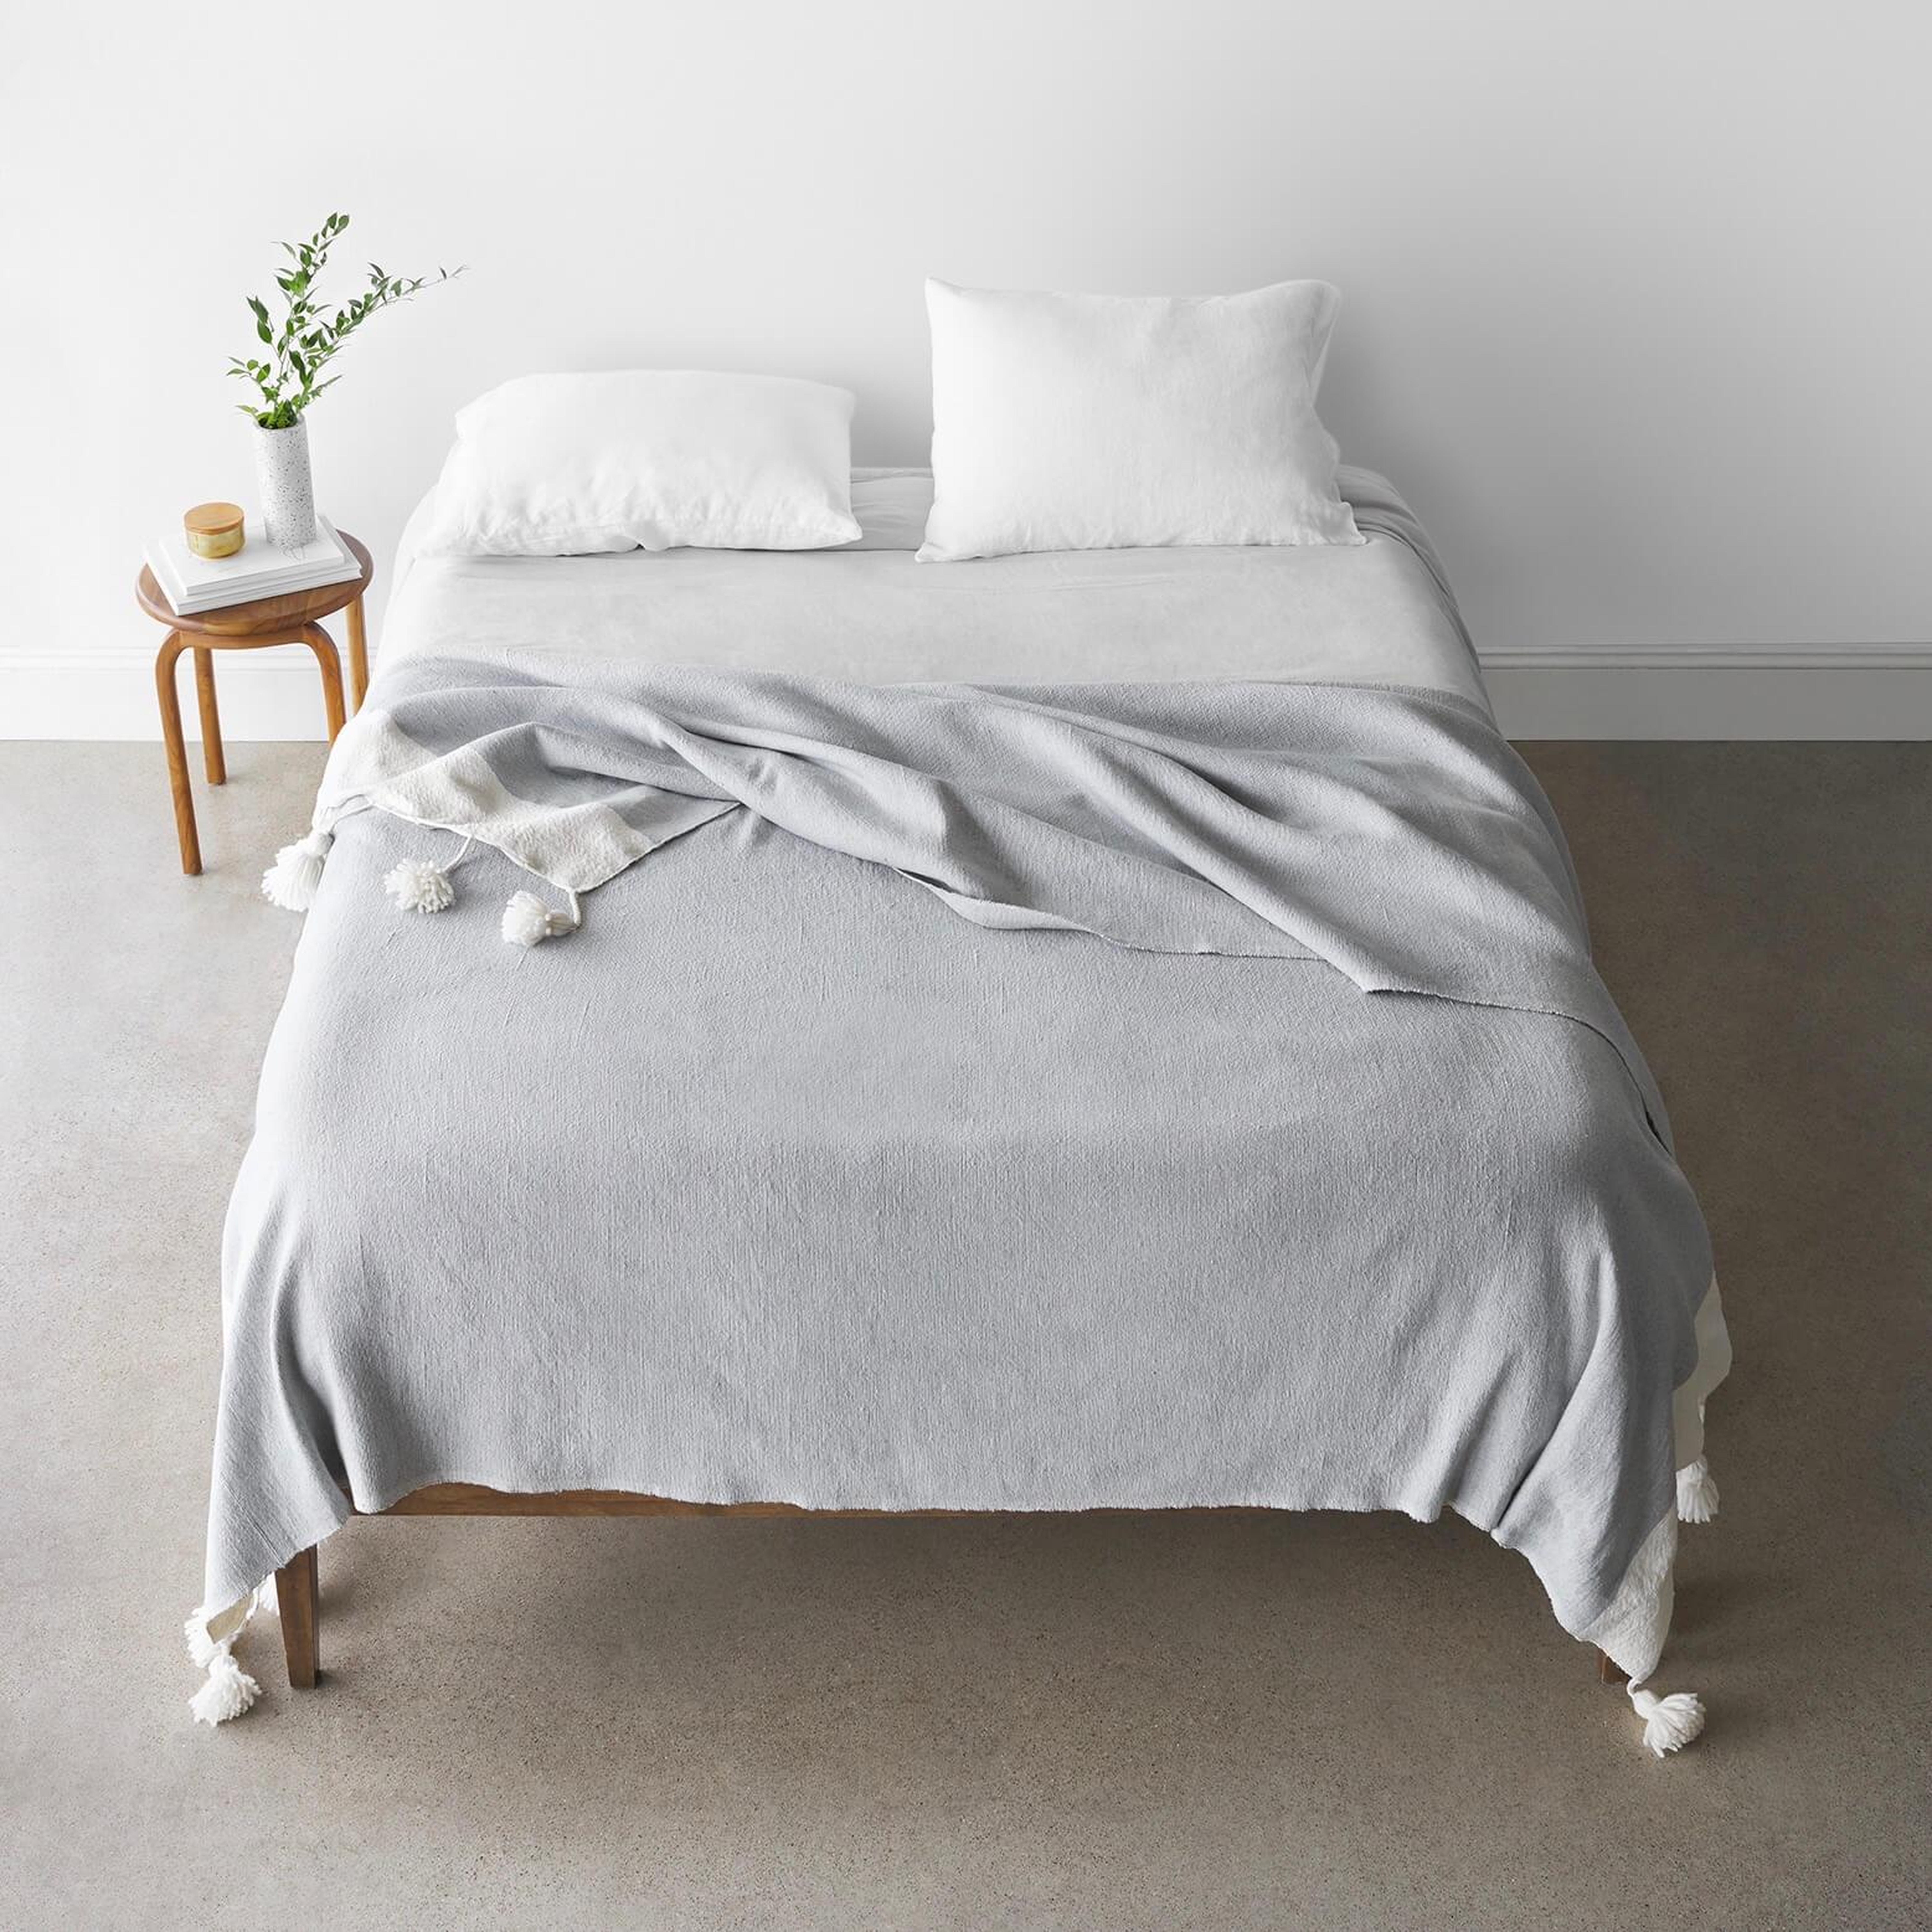 Doha Bed Blanket - Full/Queen By The Citizenry - The Citizenry